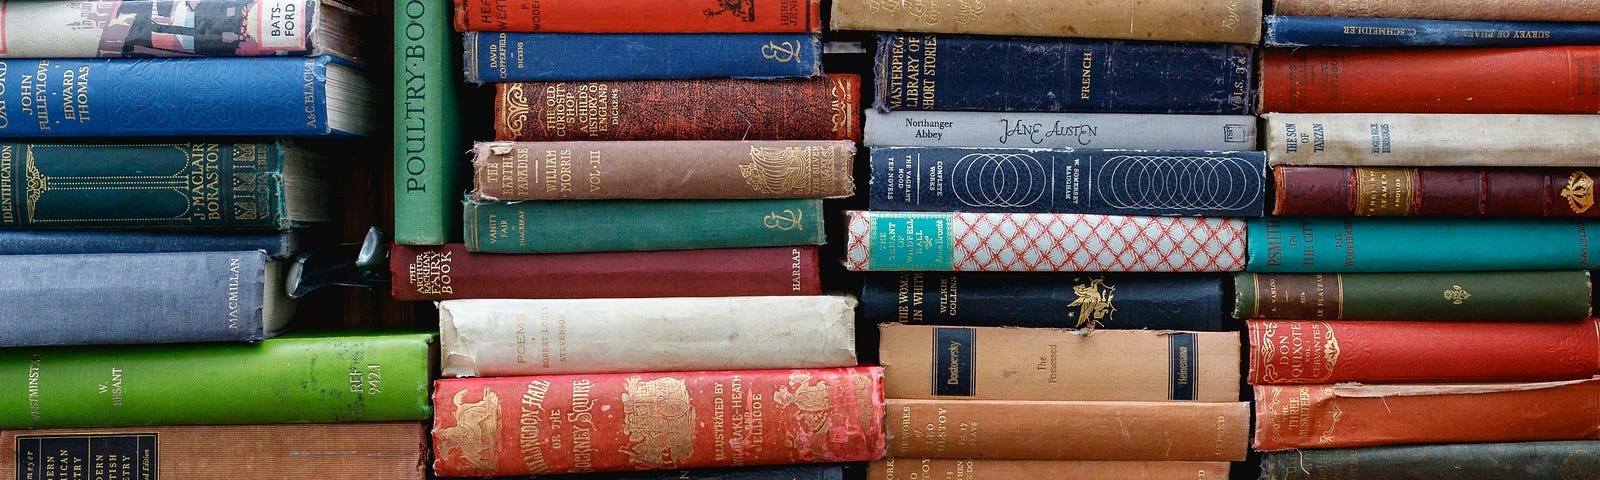 Several stacks of colorful books with their spines towards the camera.